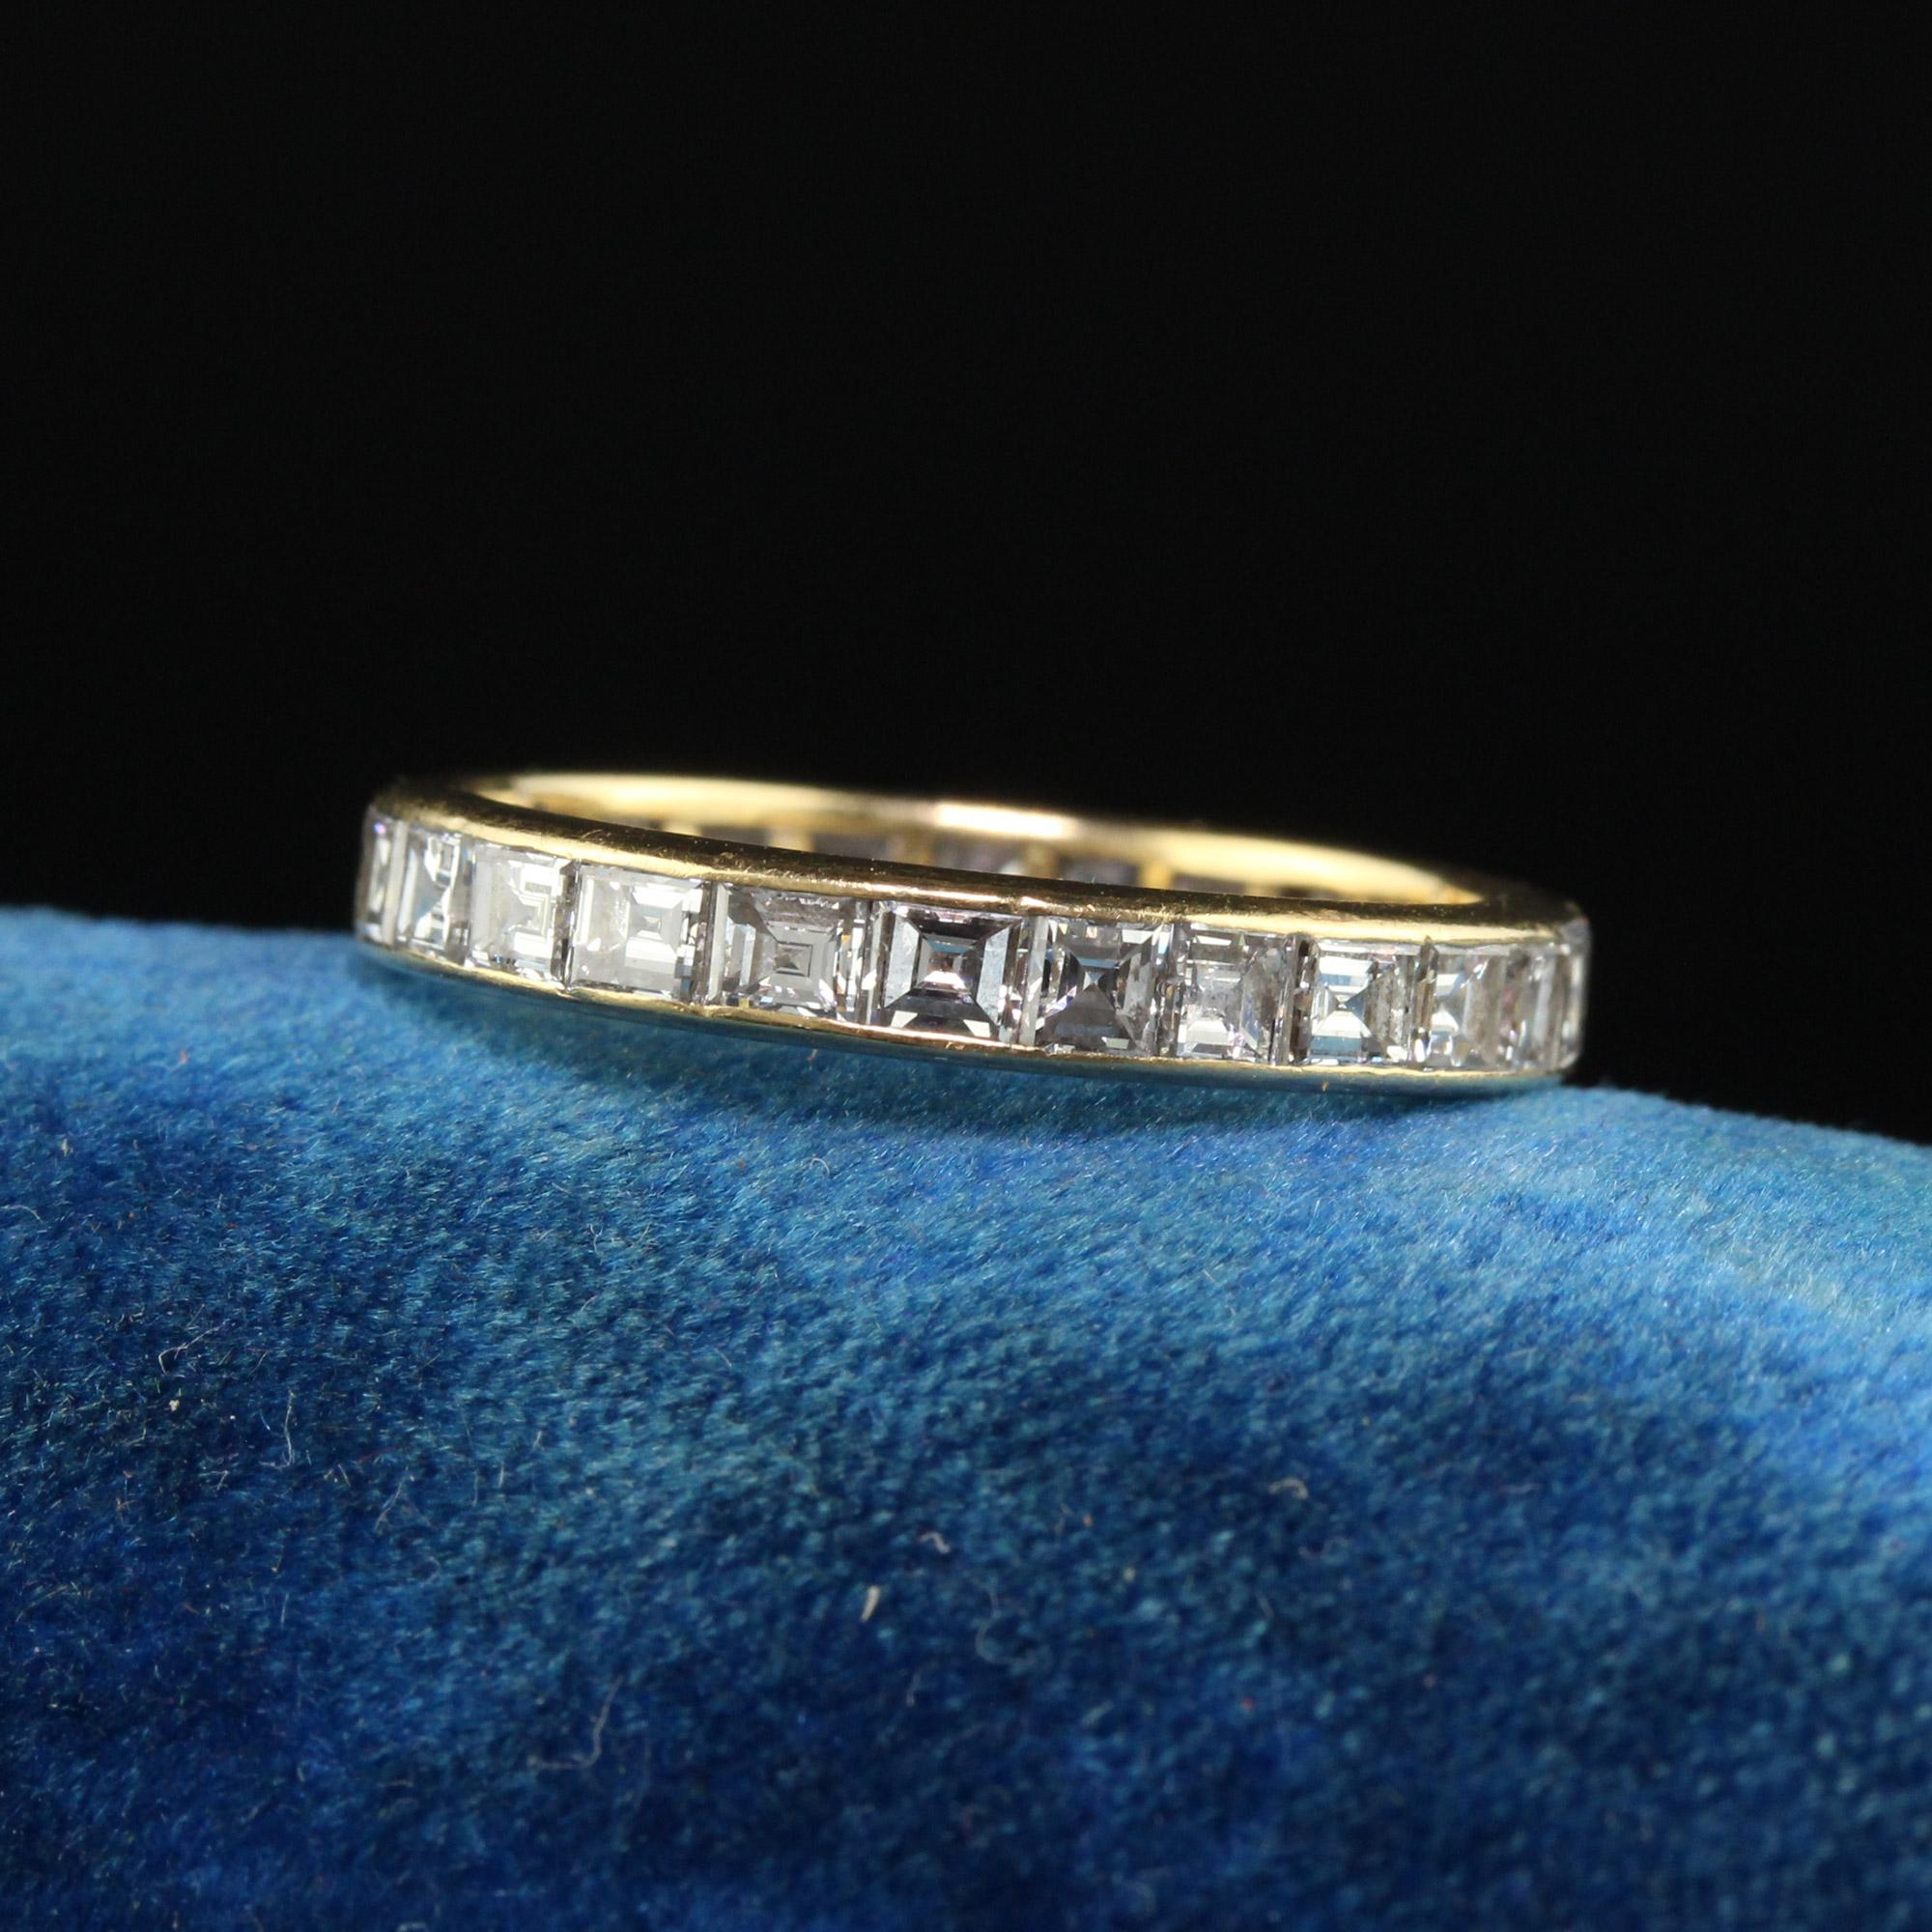 Vintage Retro 18K Yellow Gold Carre Cut Diamond Eternity Wedding Band - Size 5 1/2. This gorgeous wedding band is crafted in 18k yellow gold. There are gorgeous white carre step cut diamonds going around the entire ring and sits very low on the